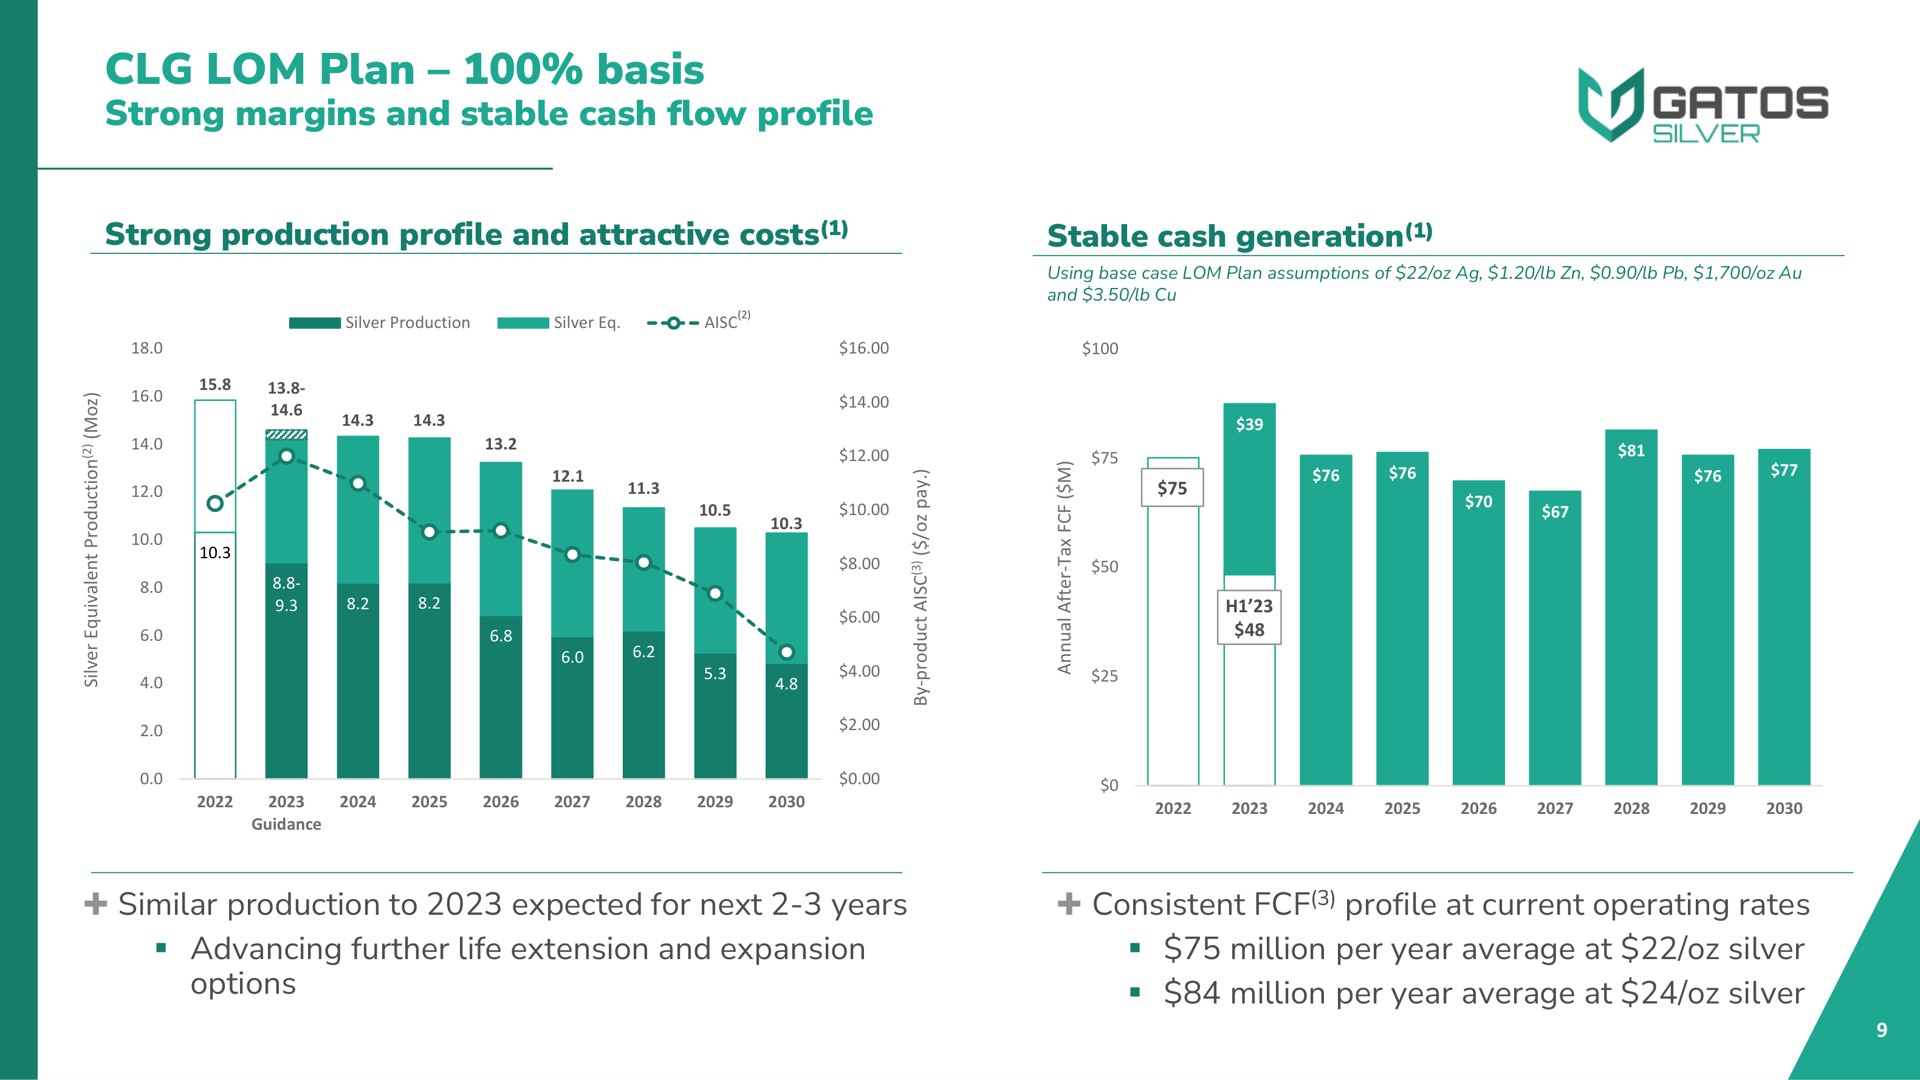 plan basis strong margins and stable cash flow profile no | Gatos Silver